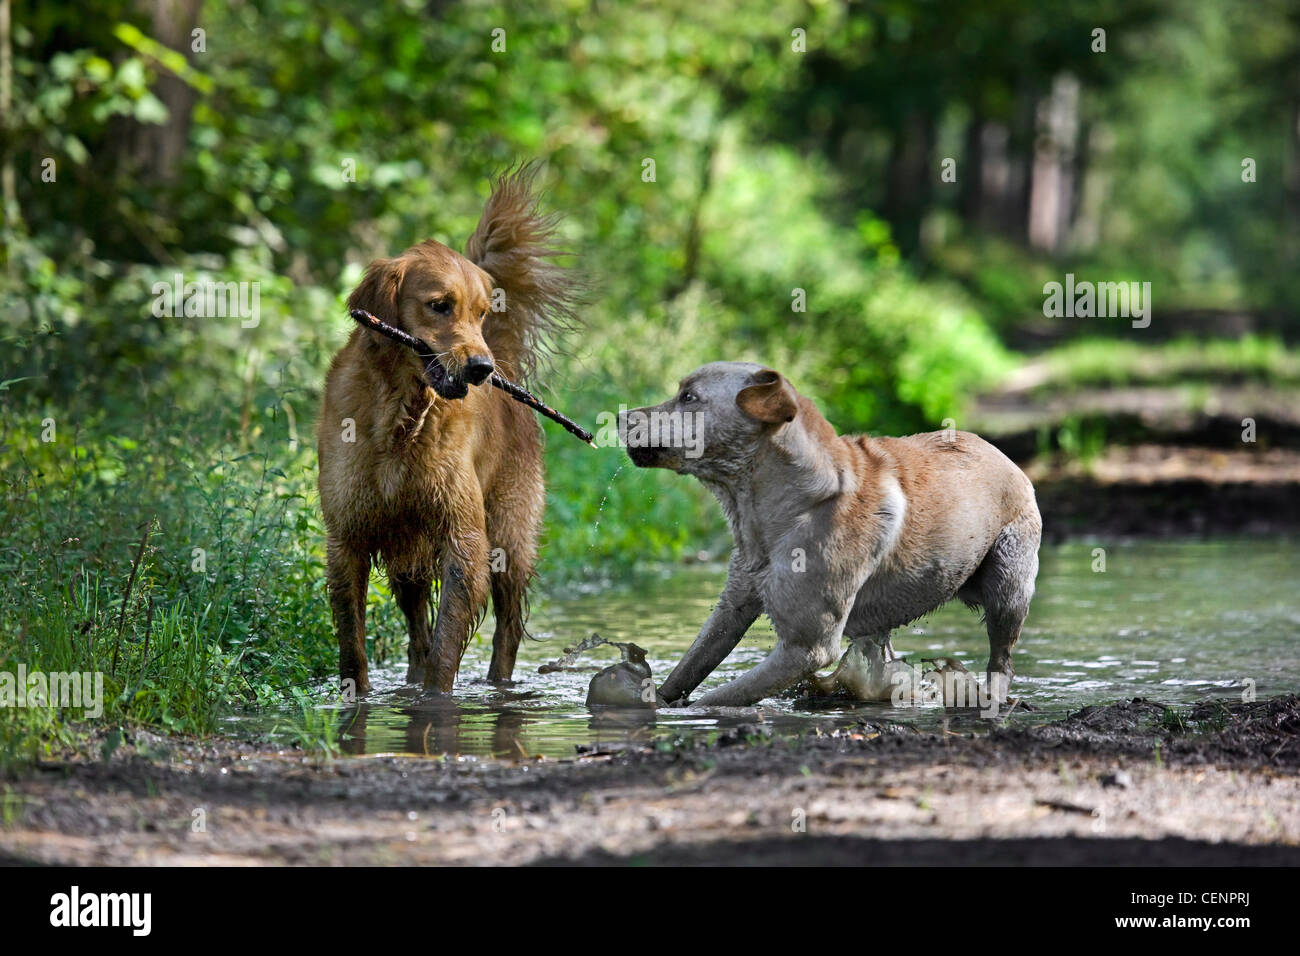 Golden retriever and labrador dogs playing and running with stick through muddy puddle on path in forest, Belgium Stock Photo